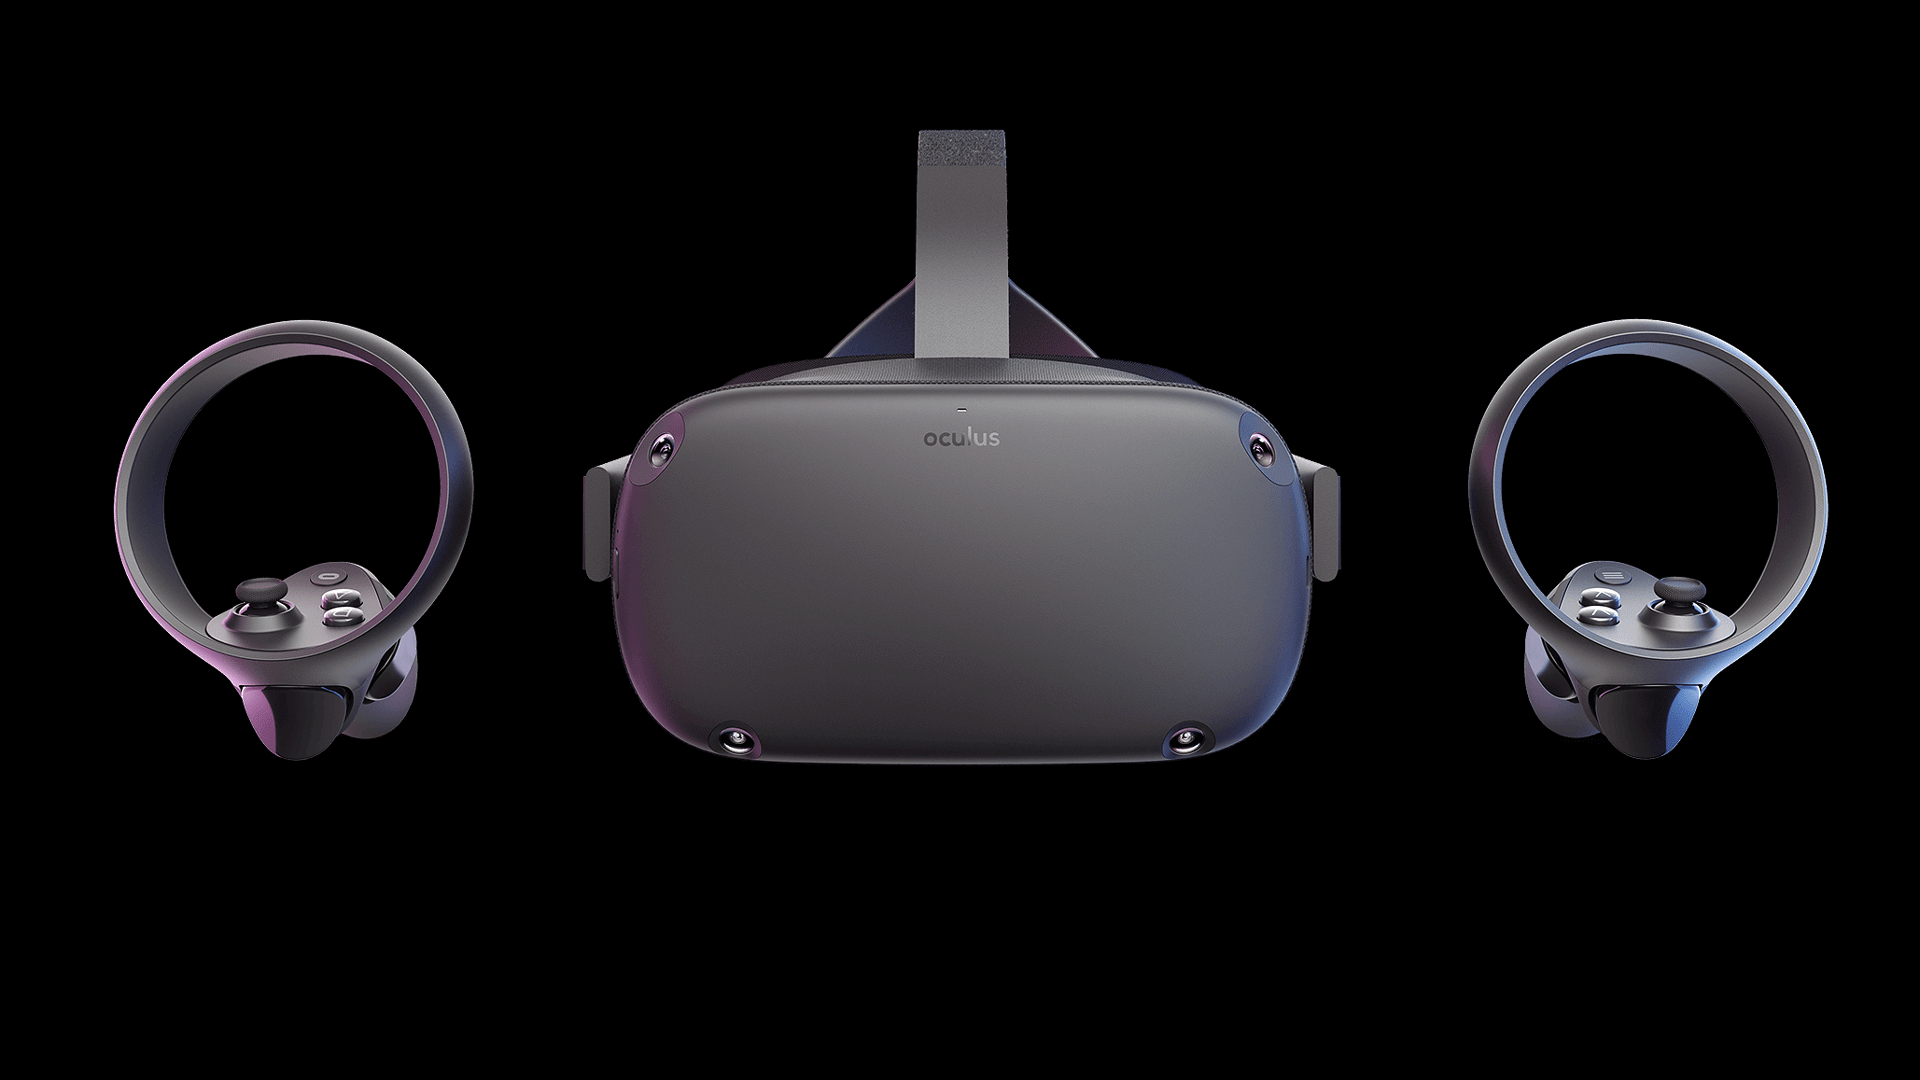 will the oculus quest go on sale for black friday